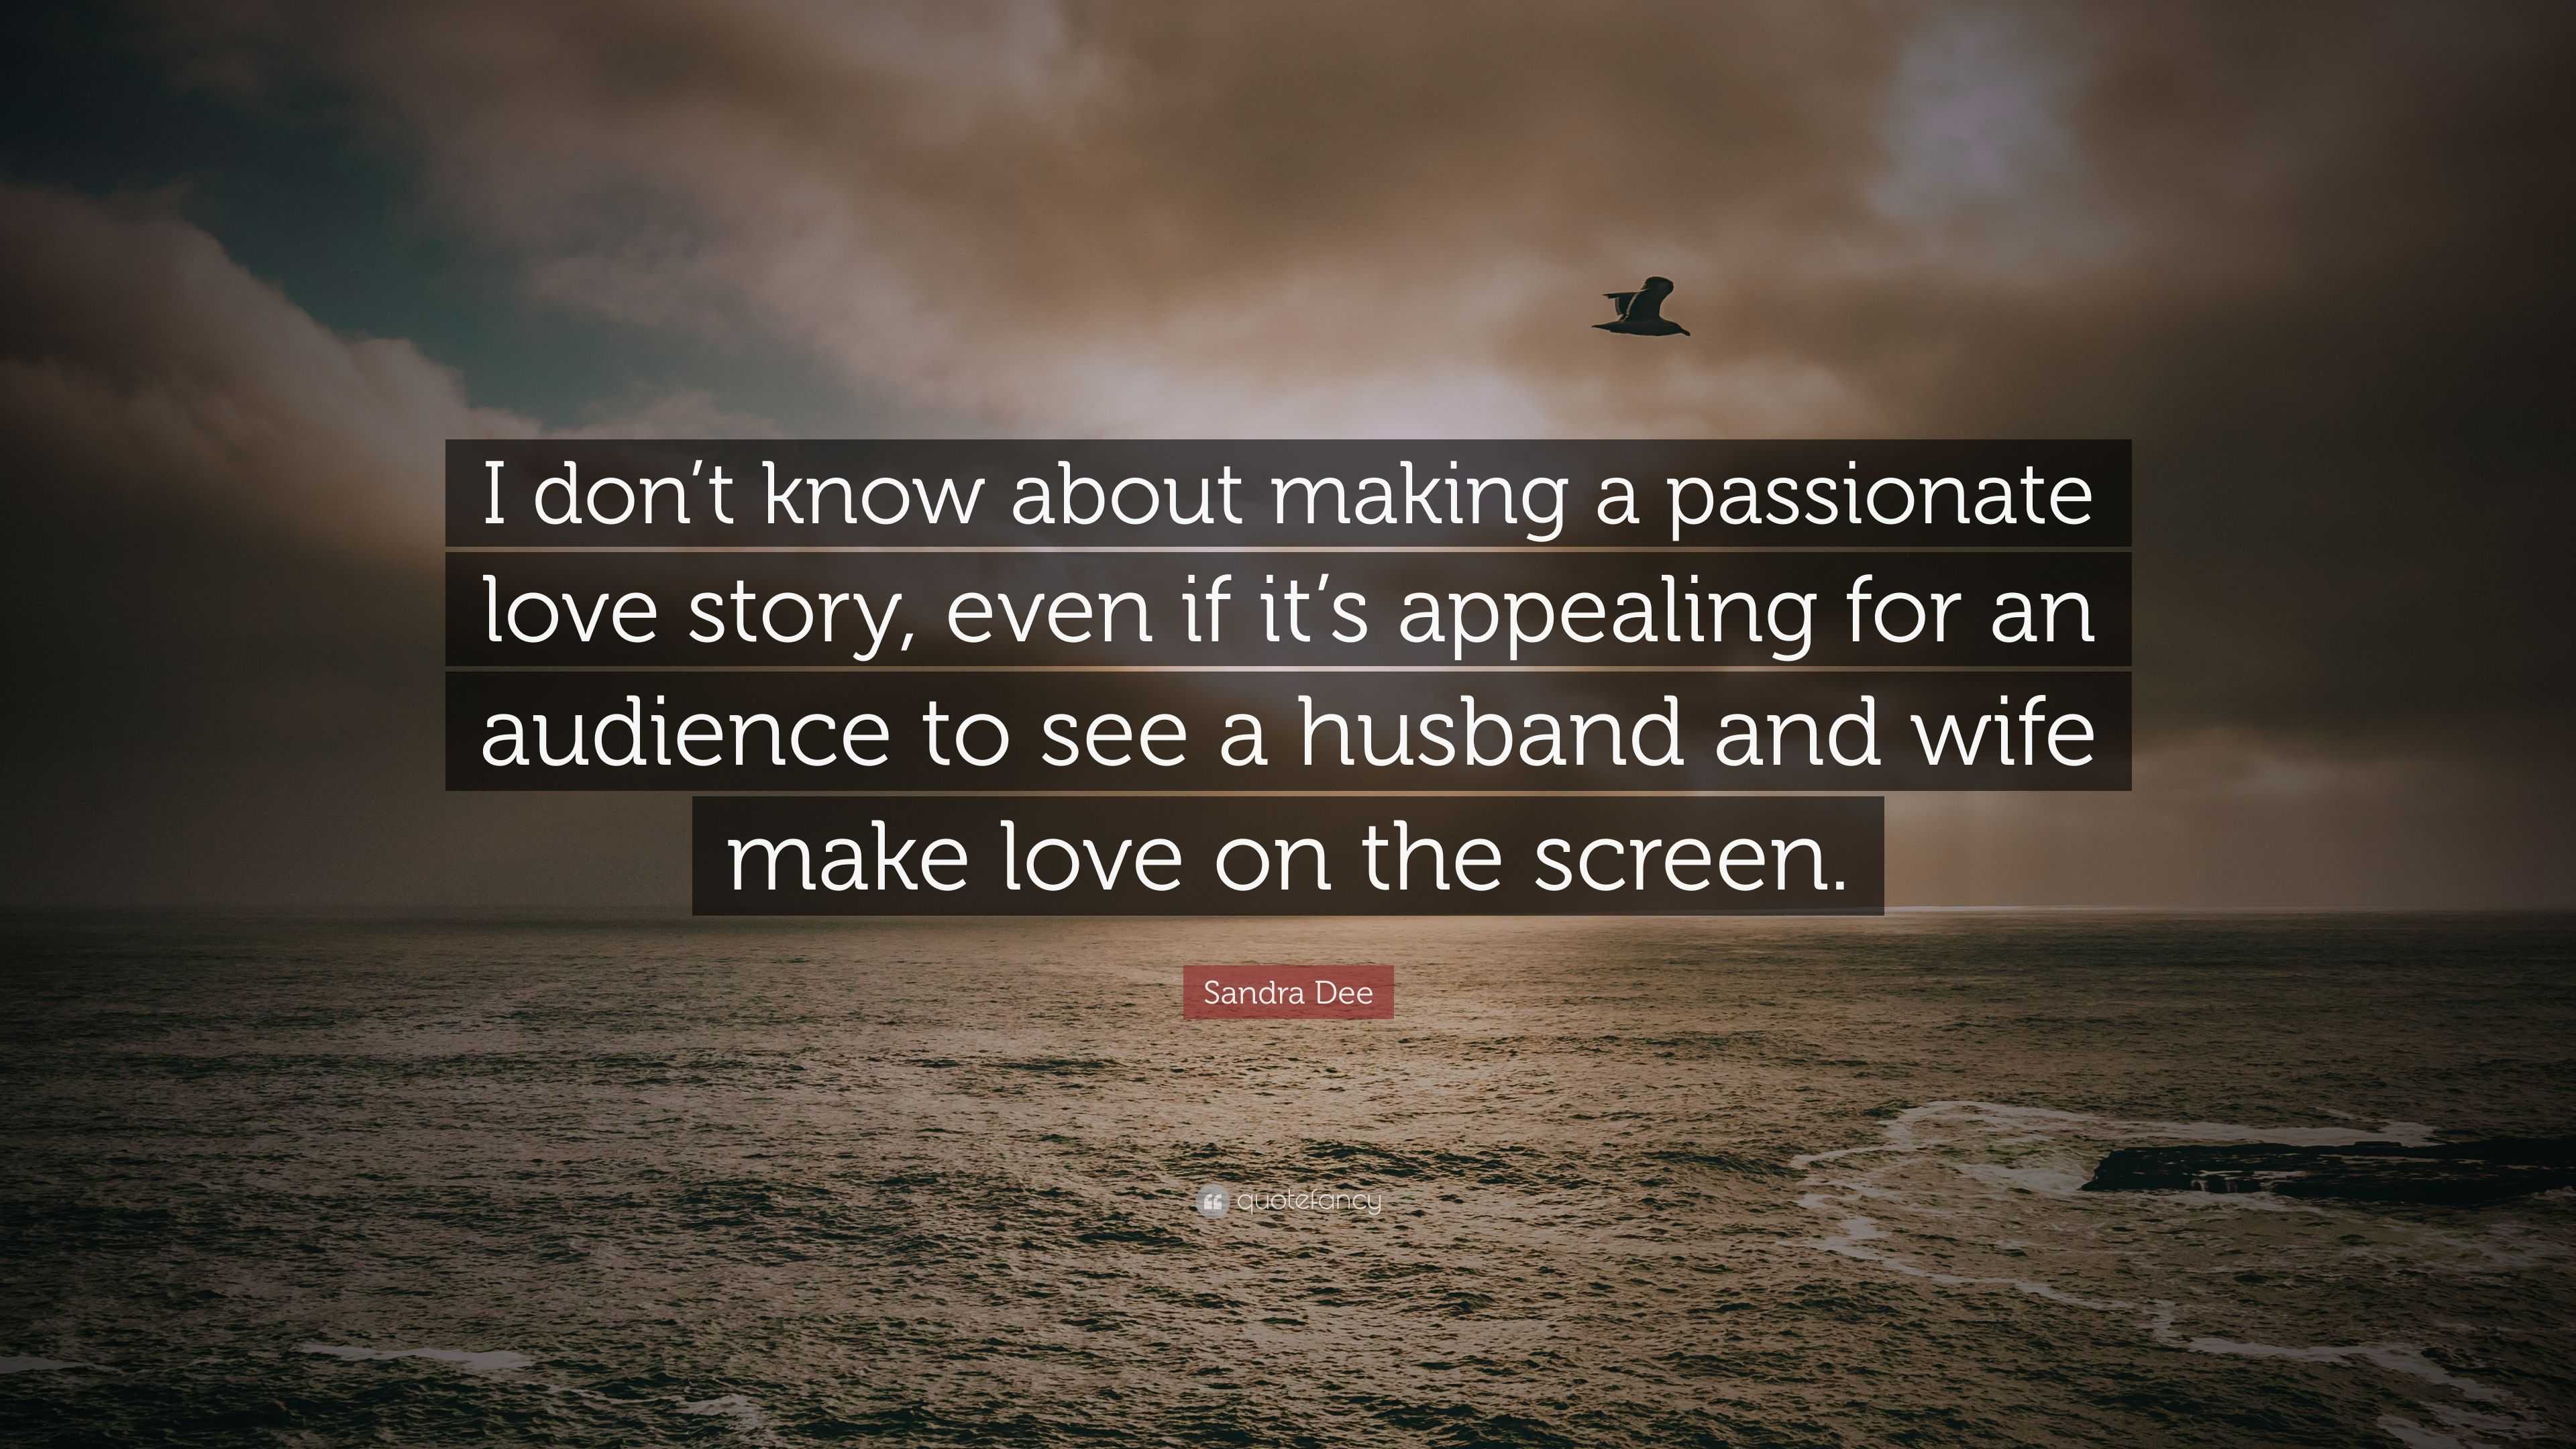 Sandra Dee Quote: "I don't know about making a passionate love story, even if it's appealing for ...